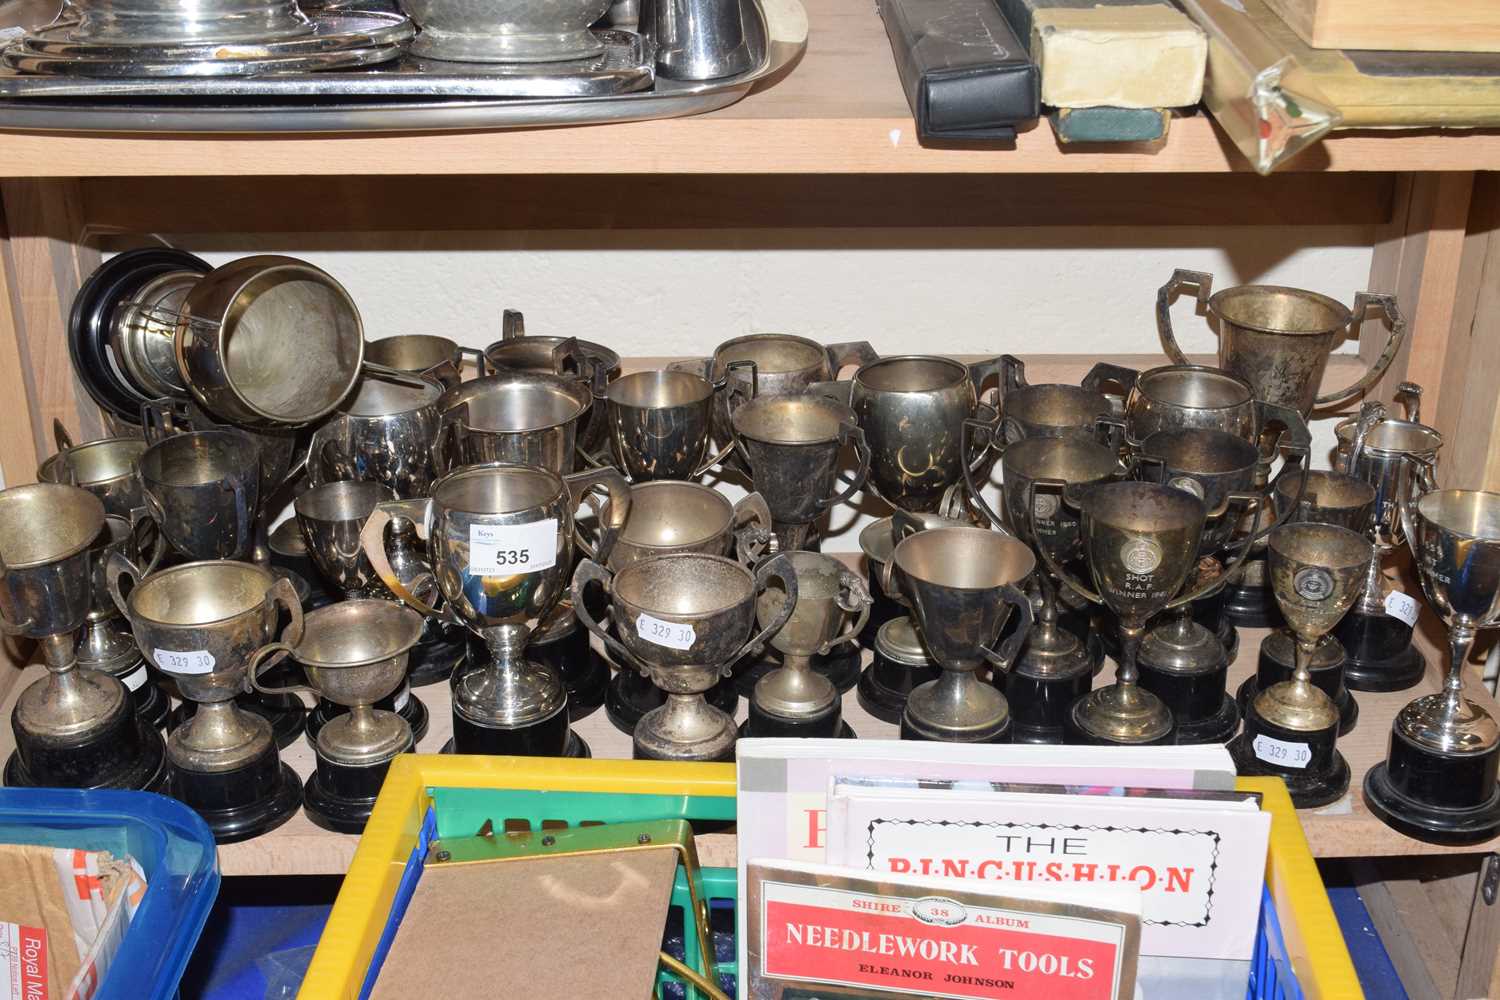 Large quantity of trophy cups